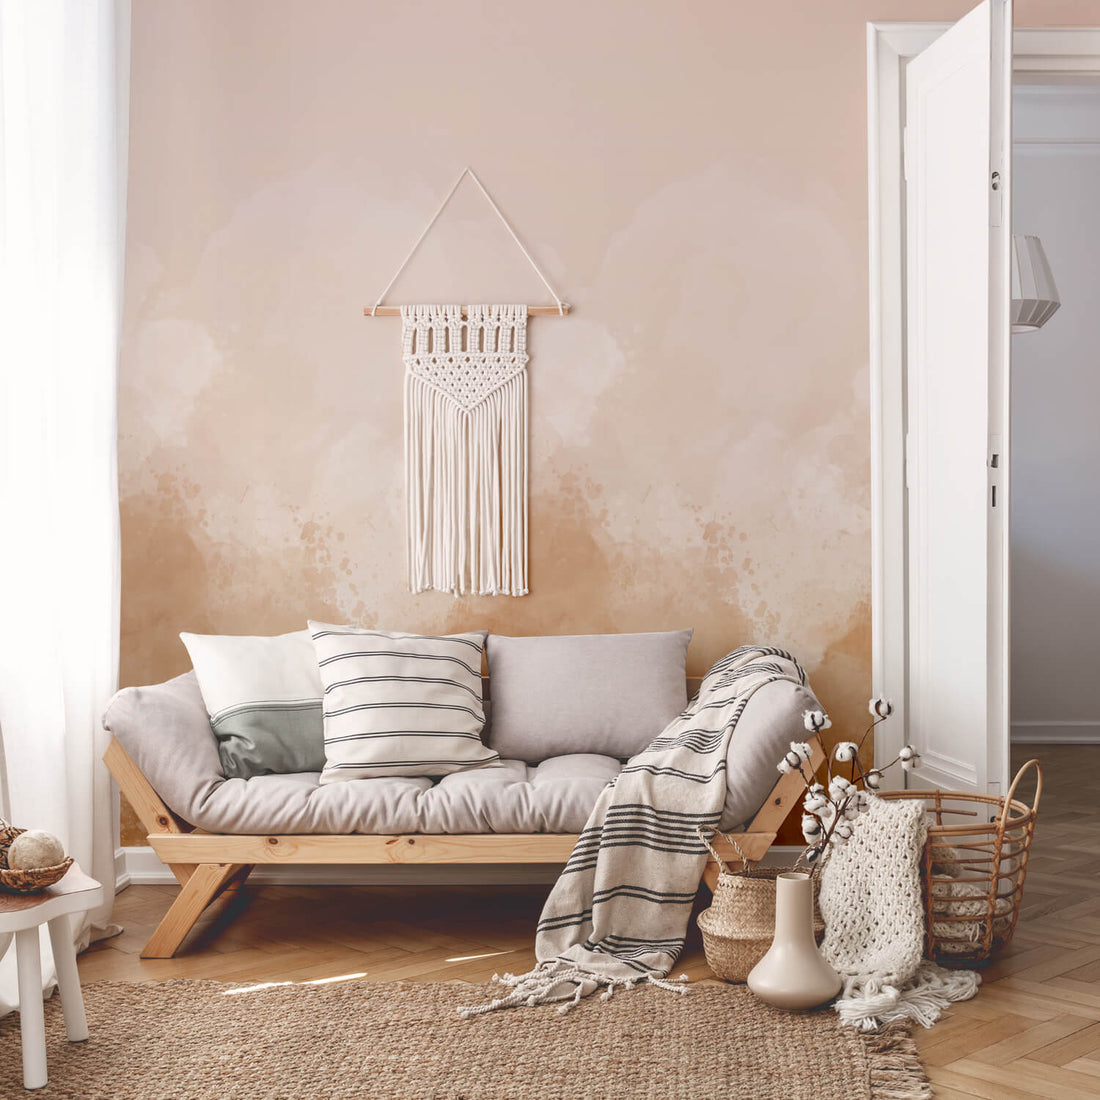 bohemian style living room wallpaper in peach color ombre style